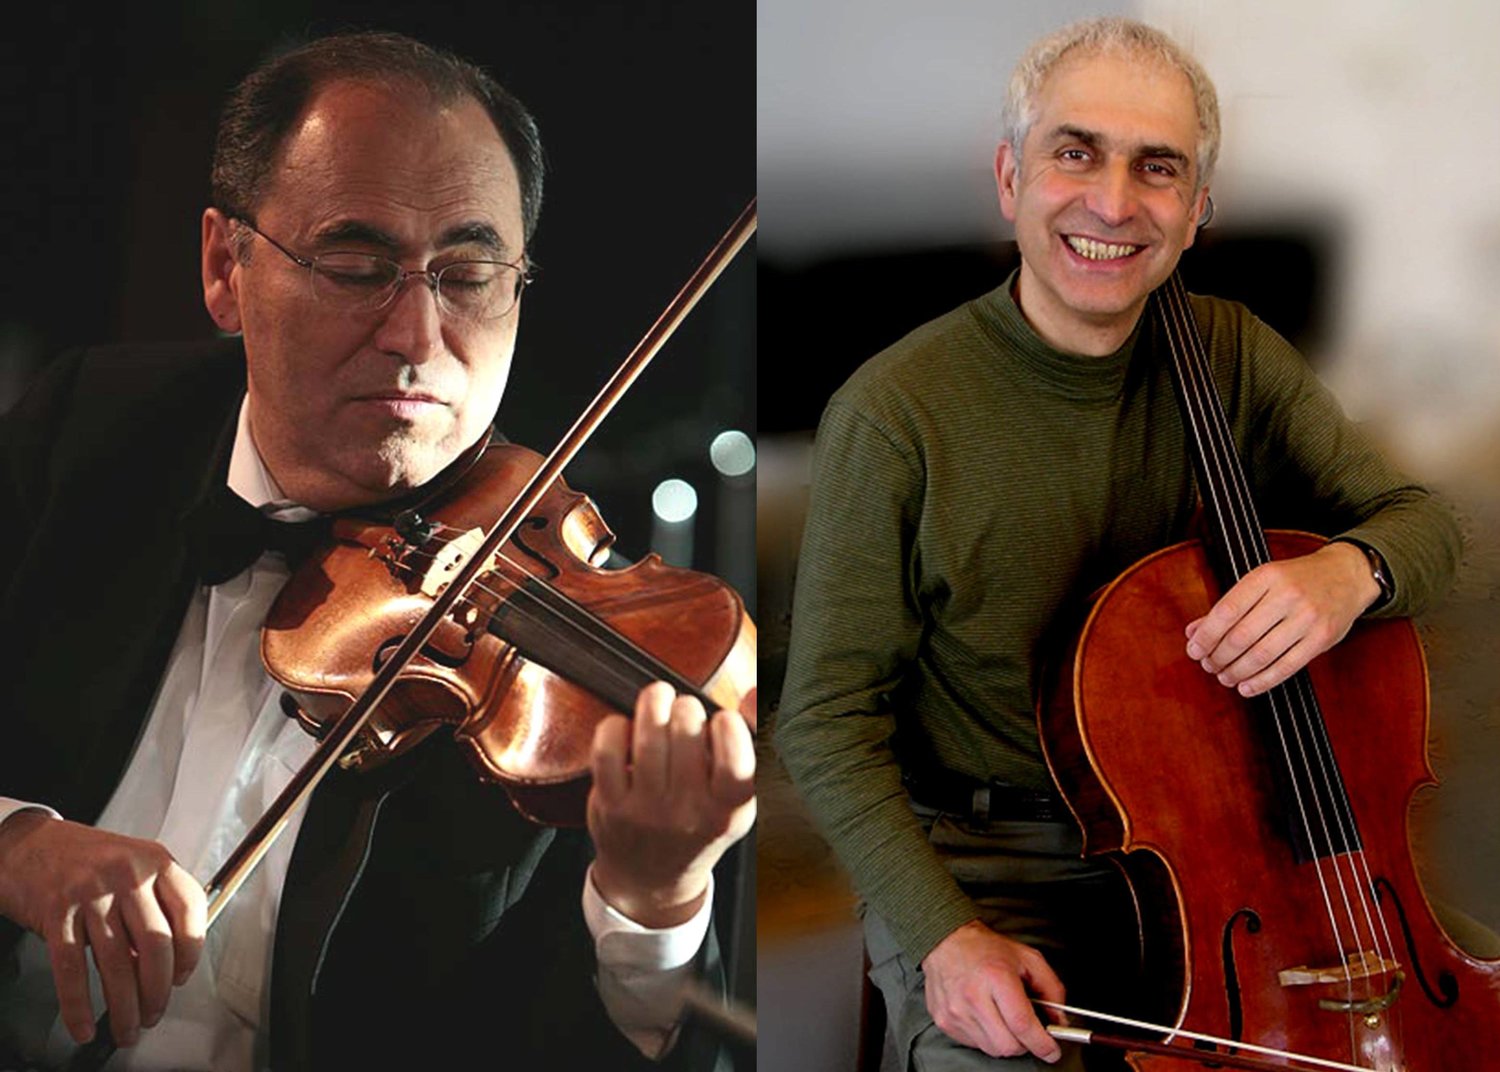 Violinist Mikhail Kopelman, left, and cellist Yosif Feigelson will perform duets on Saturday, August 20 at Grey Towers National Historic Site.